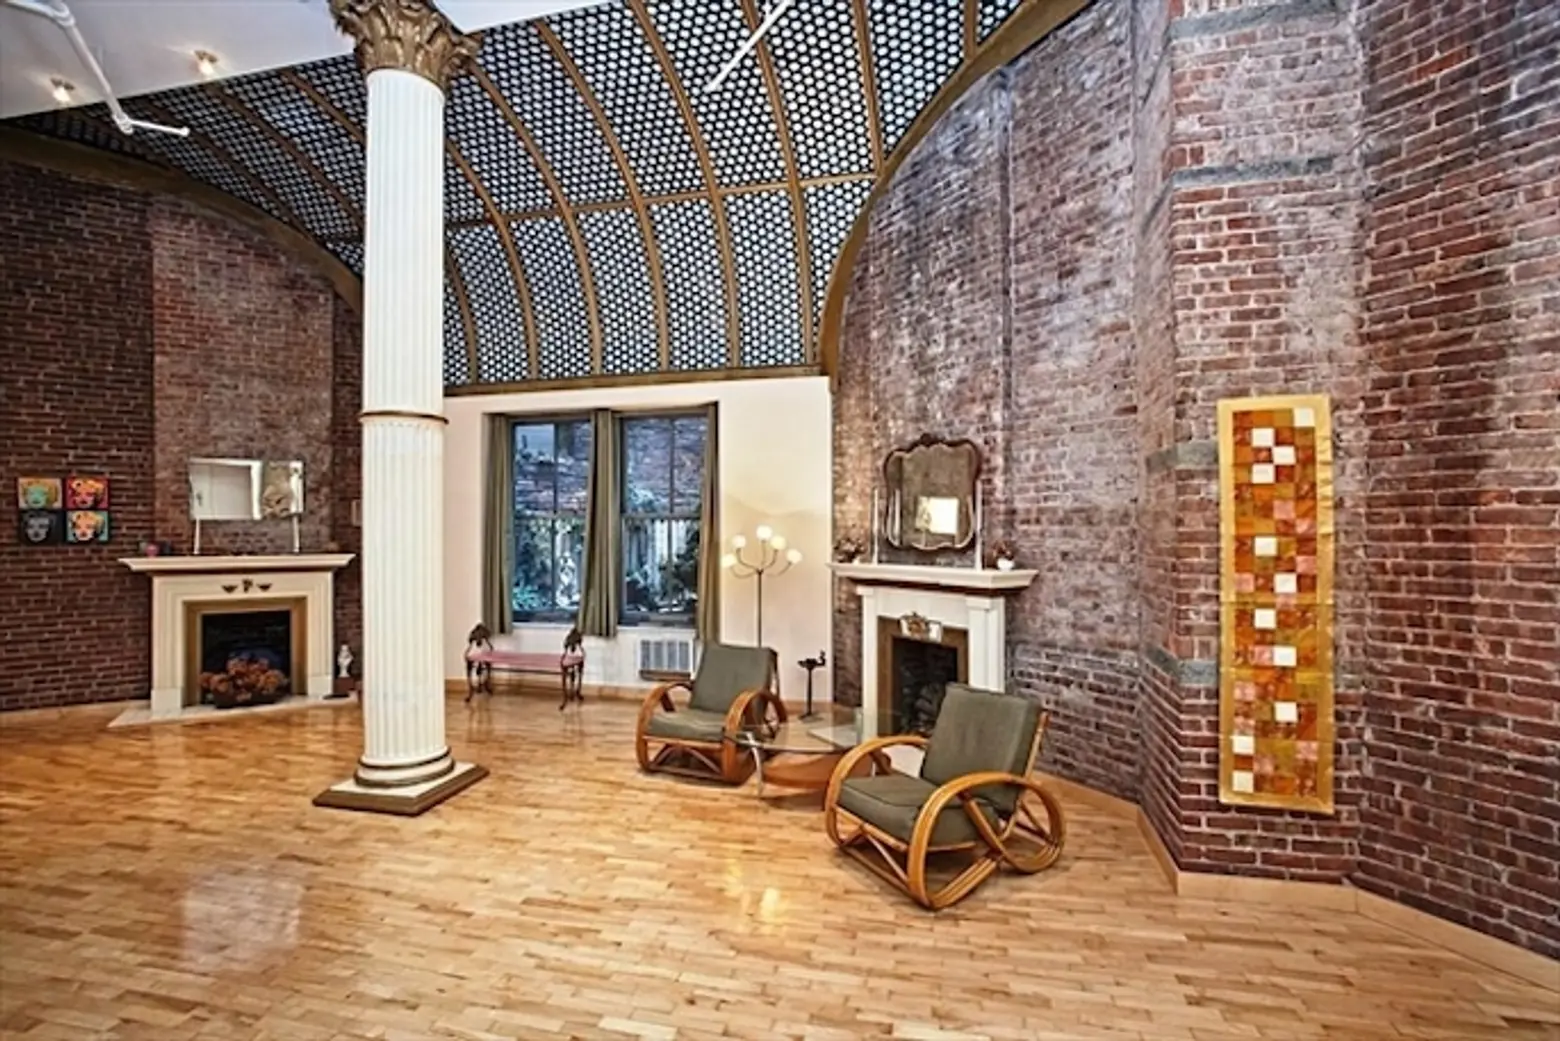 Quirky Soho Loft With Honey-Comb Skylight Sells for $2.15 Million After 6 Months on the Market